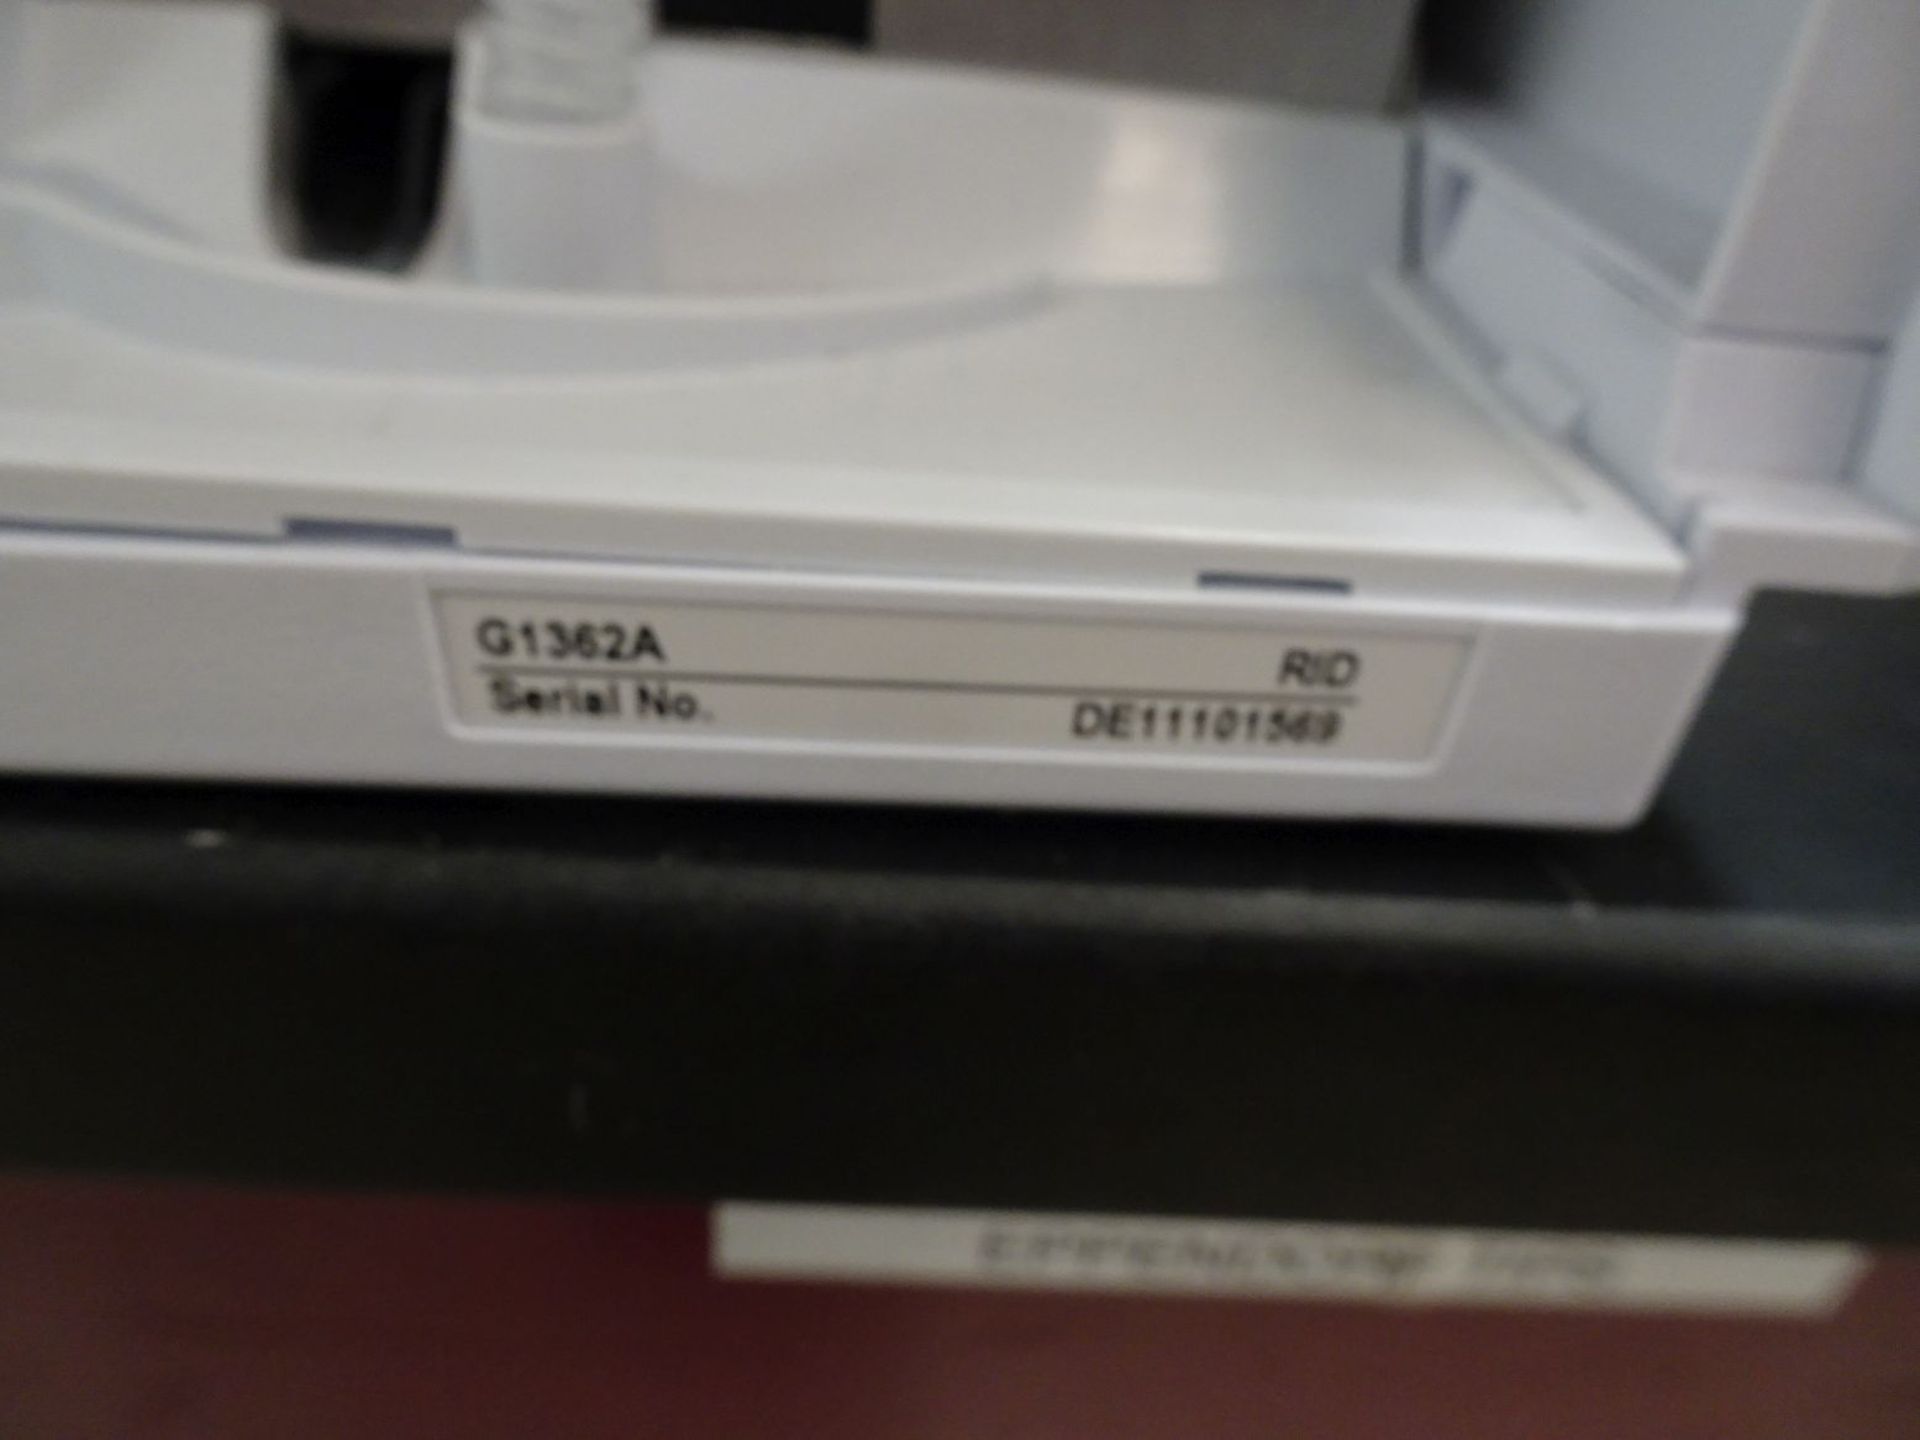 Agilent Technologies 1100 Series HPLC System - Image 7 of 7